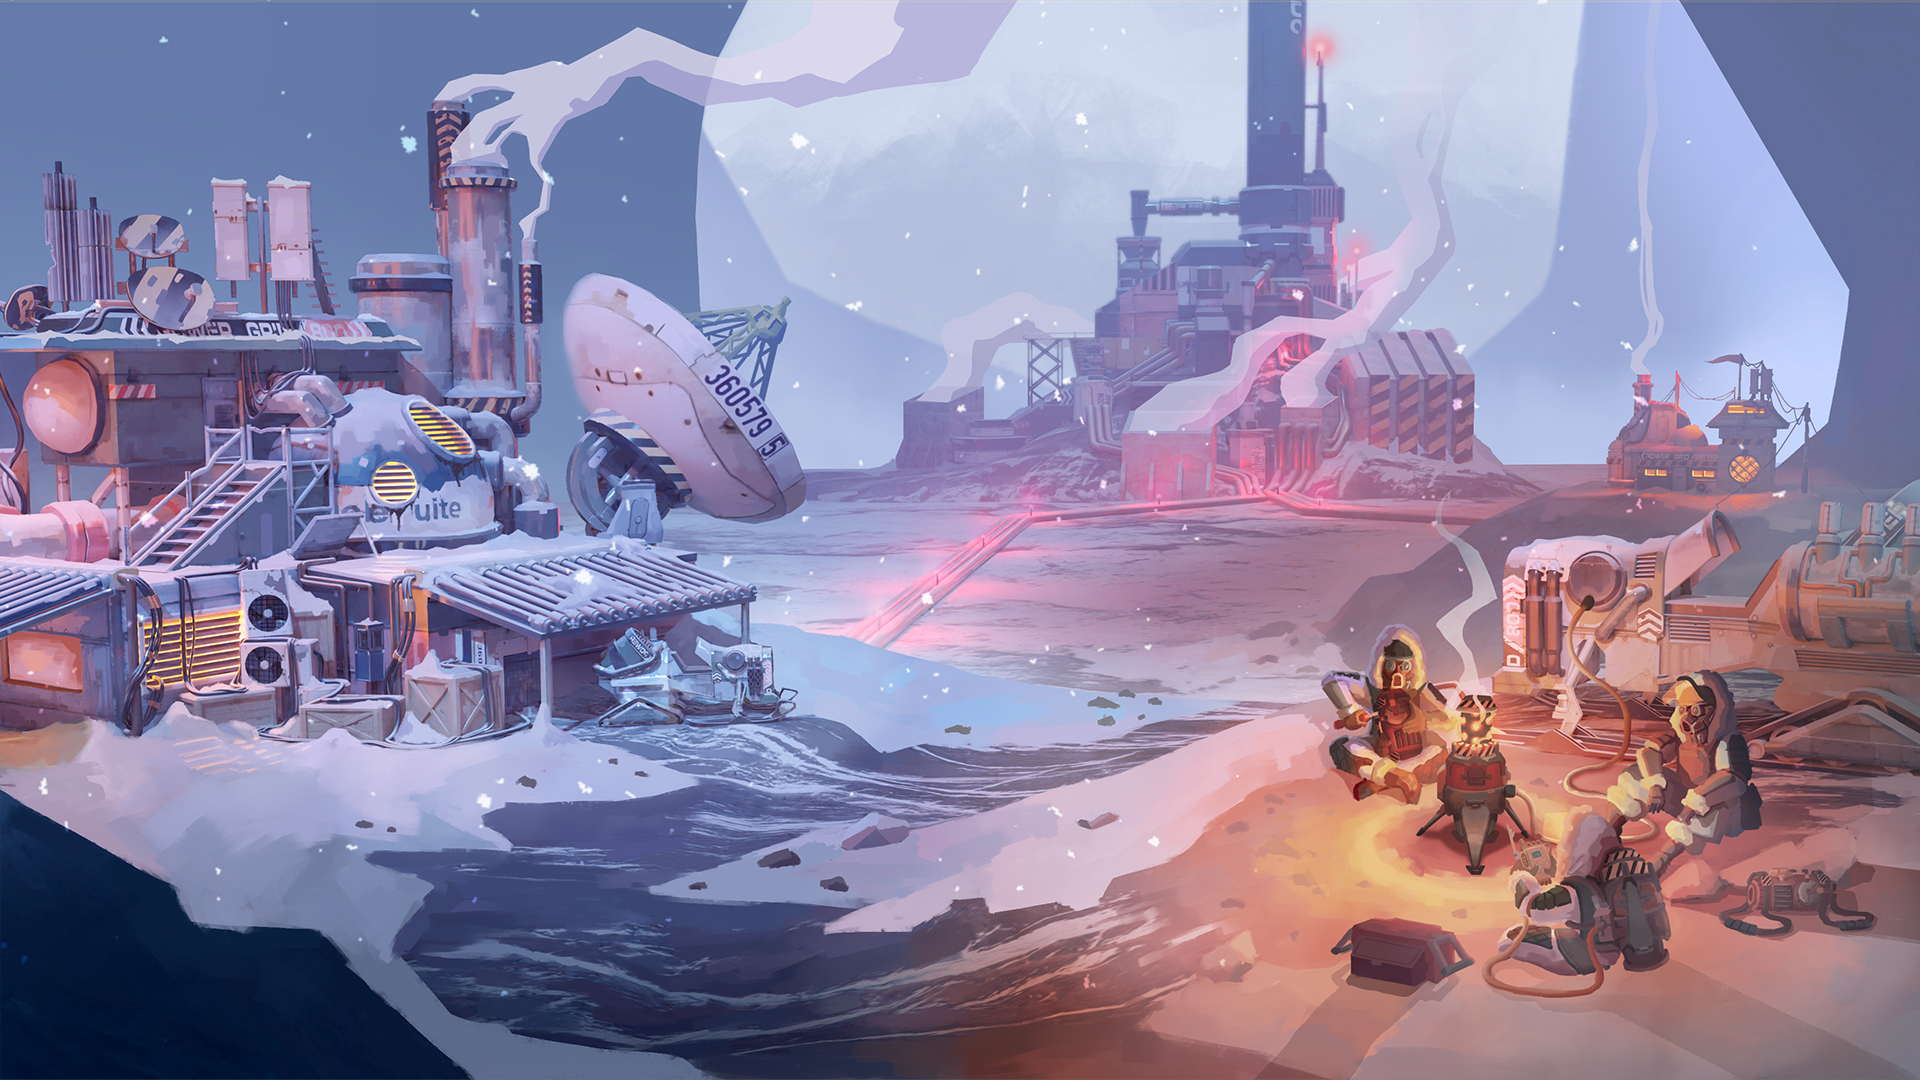 A keyframe painting depicting a vast snowy landscape scattered with industrial buildings and a group of engineers taking a break in the foreground.